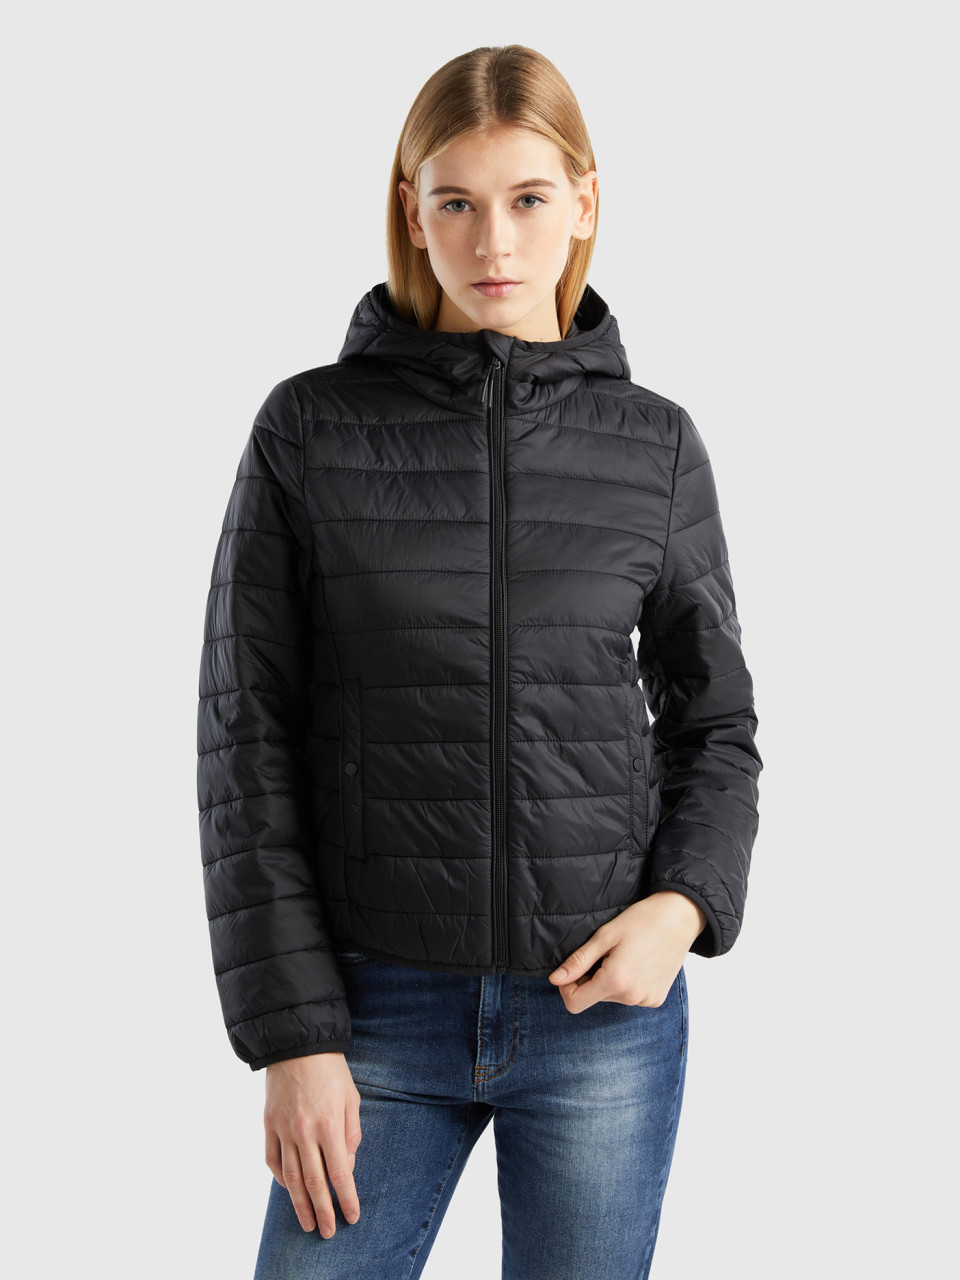 Benetton, Puffer Jacket With Recycled Wadding, Black, Women